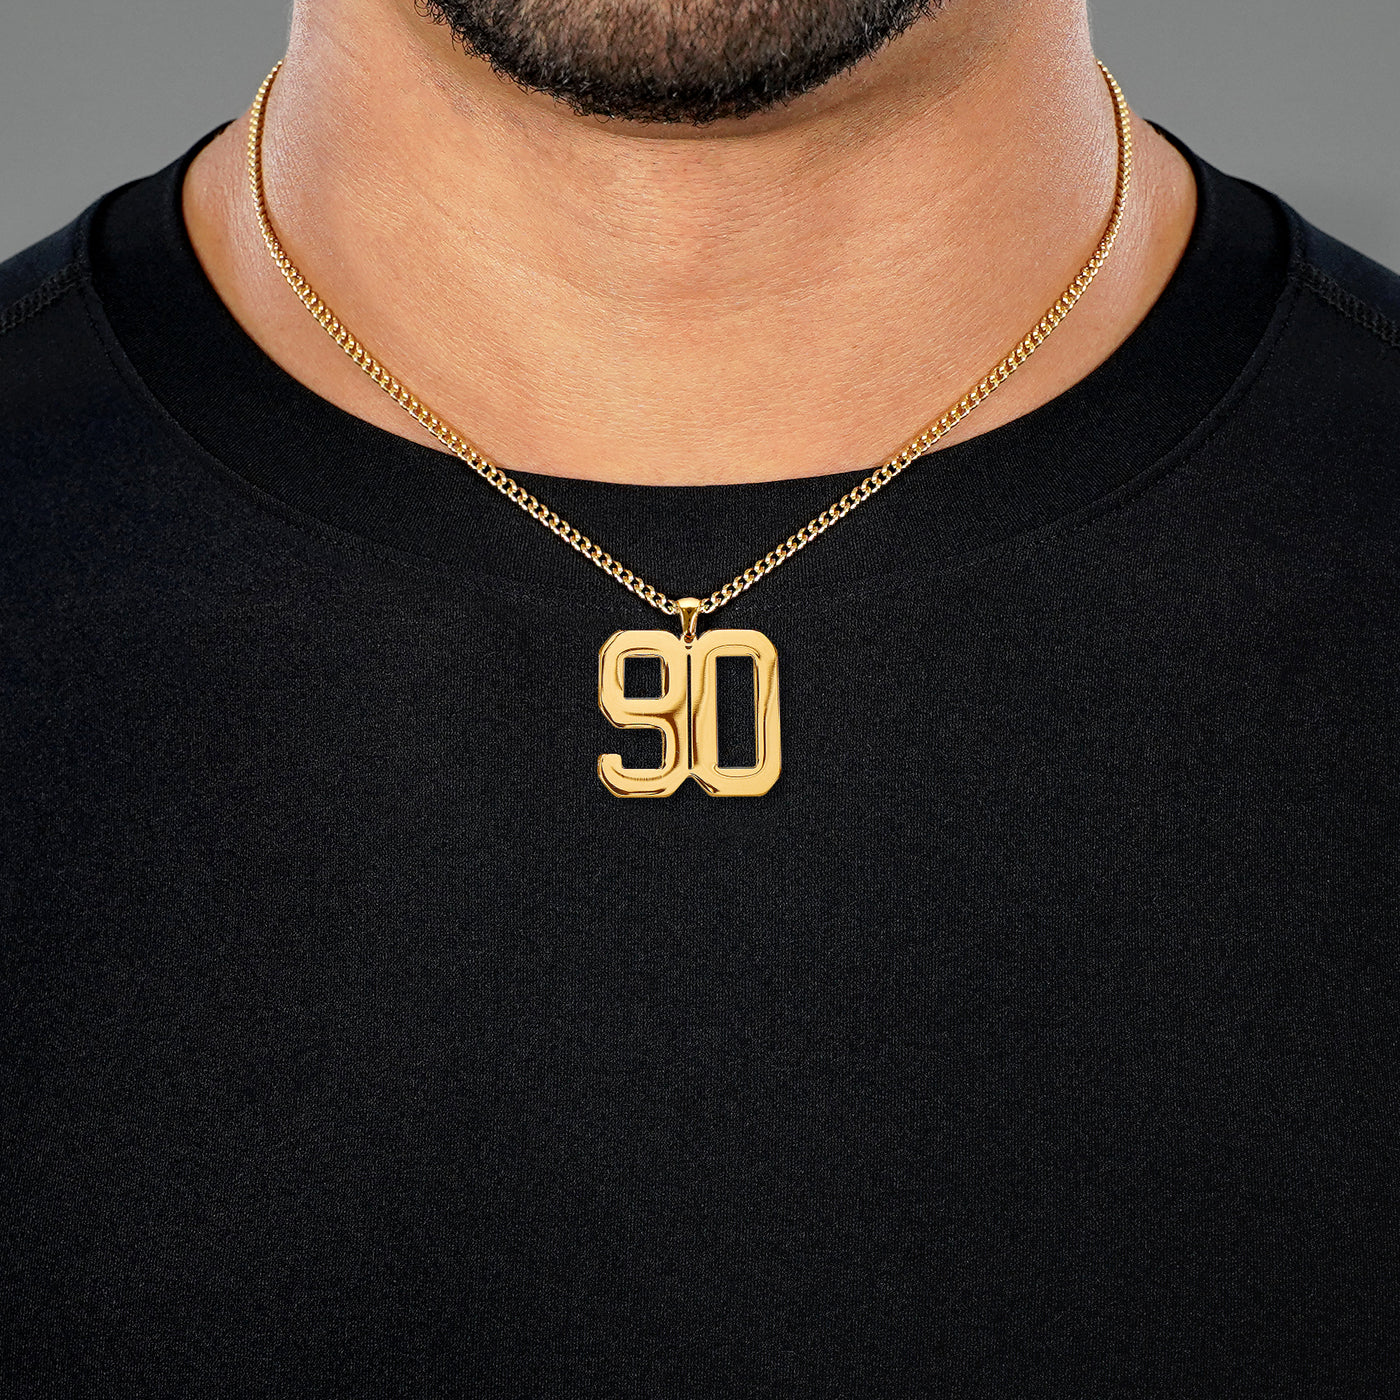 90 Number Pendant with Chain Necklace - Gold Plated Stainless Steel